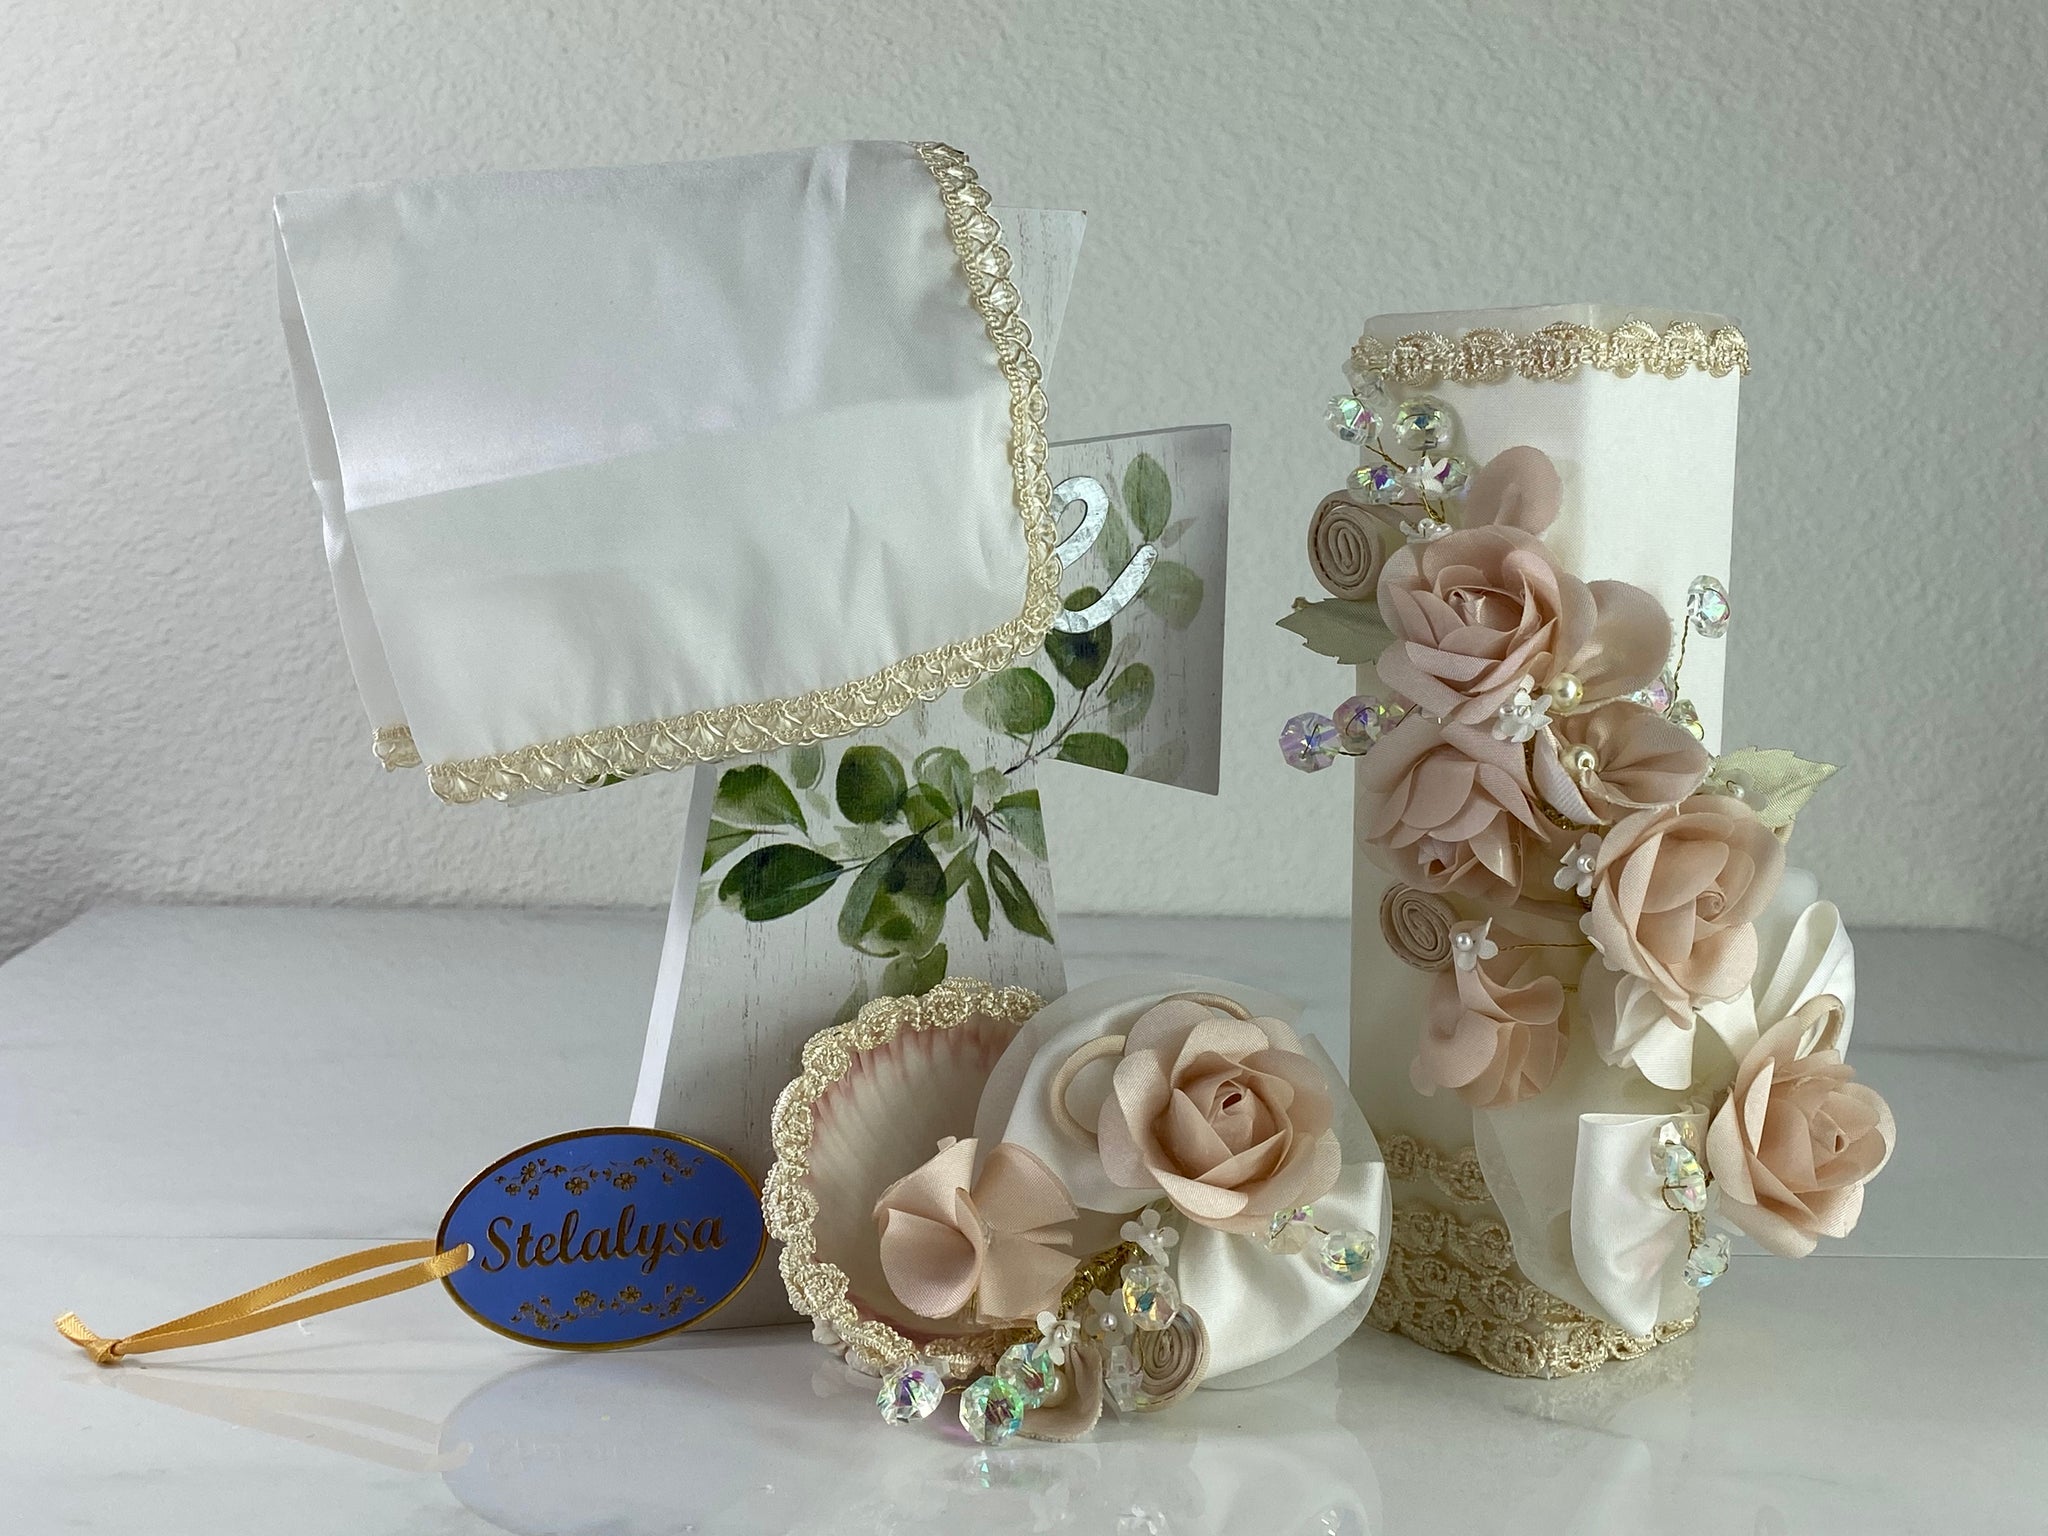 These one-of-a-kind Candle set is handmade and ivory in color.  This candle can also be use with a white baptism outfit because it has an array of light colors including white.   It is uniquely decorated with ribbon, pearls, crystals, flowers, and beads making it a gorgeous keepsake.   This candle is rectangular in shape.    To match, the Shell is put together piece by piece to compliment the Candle and Handkerchief.  